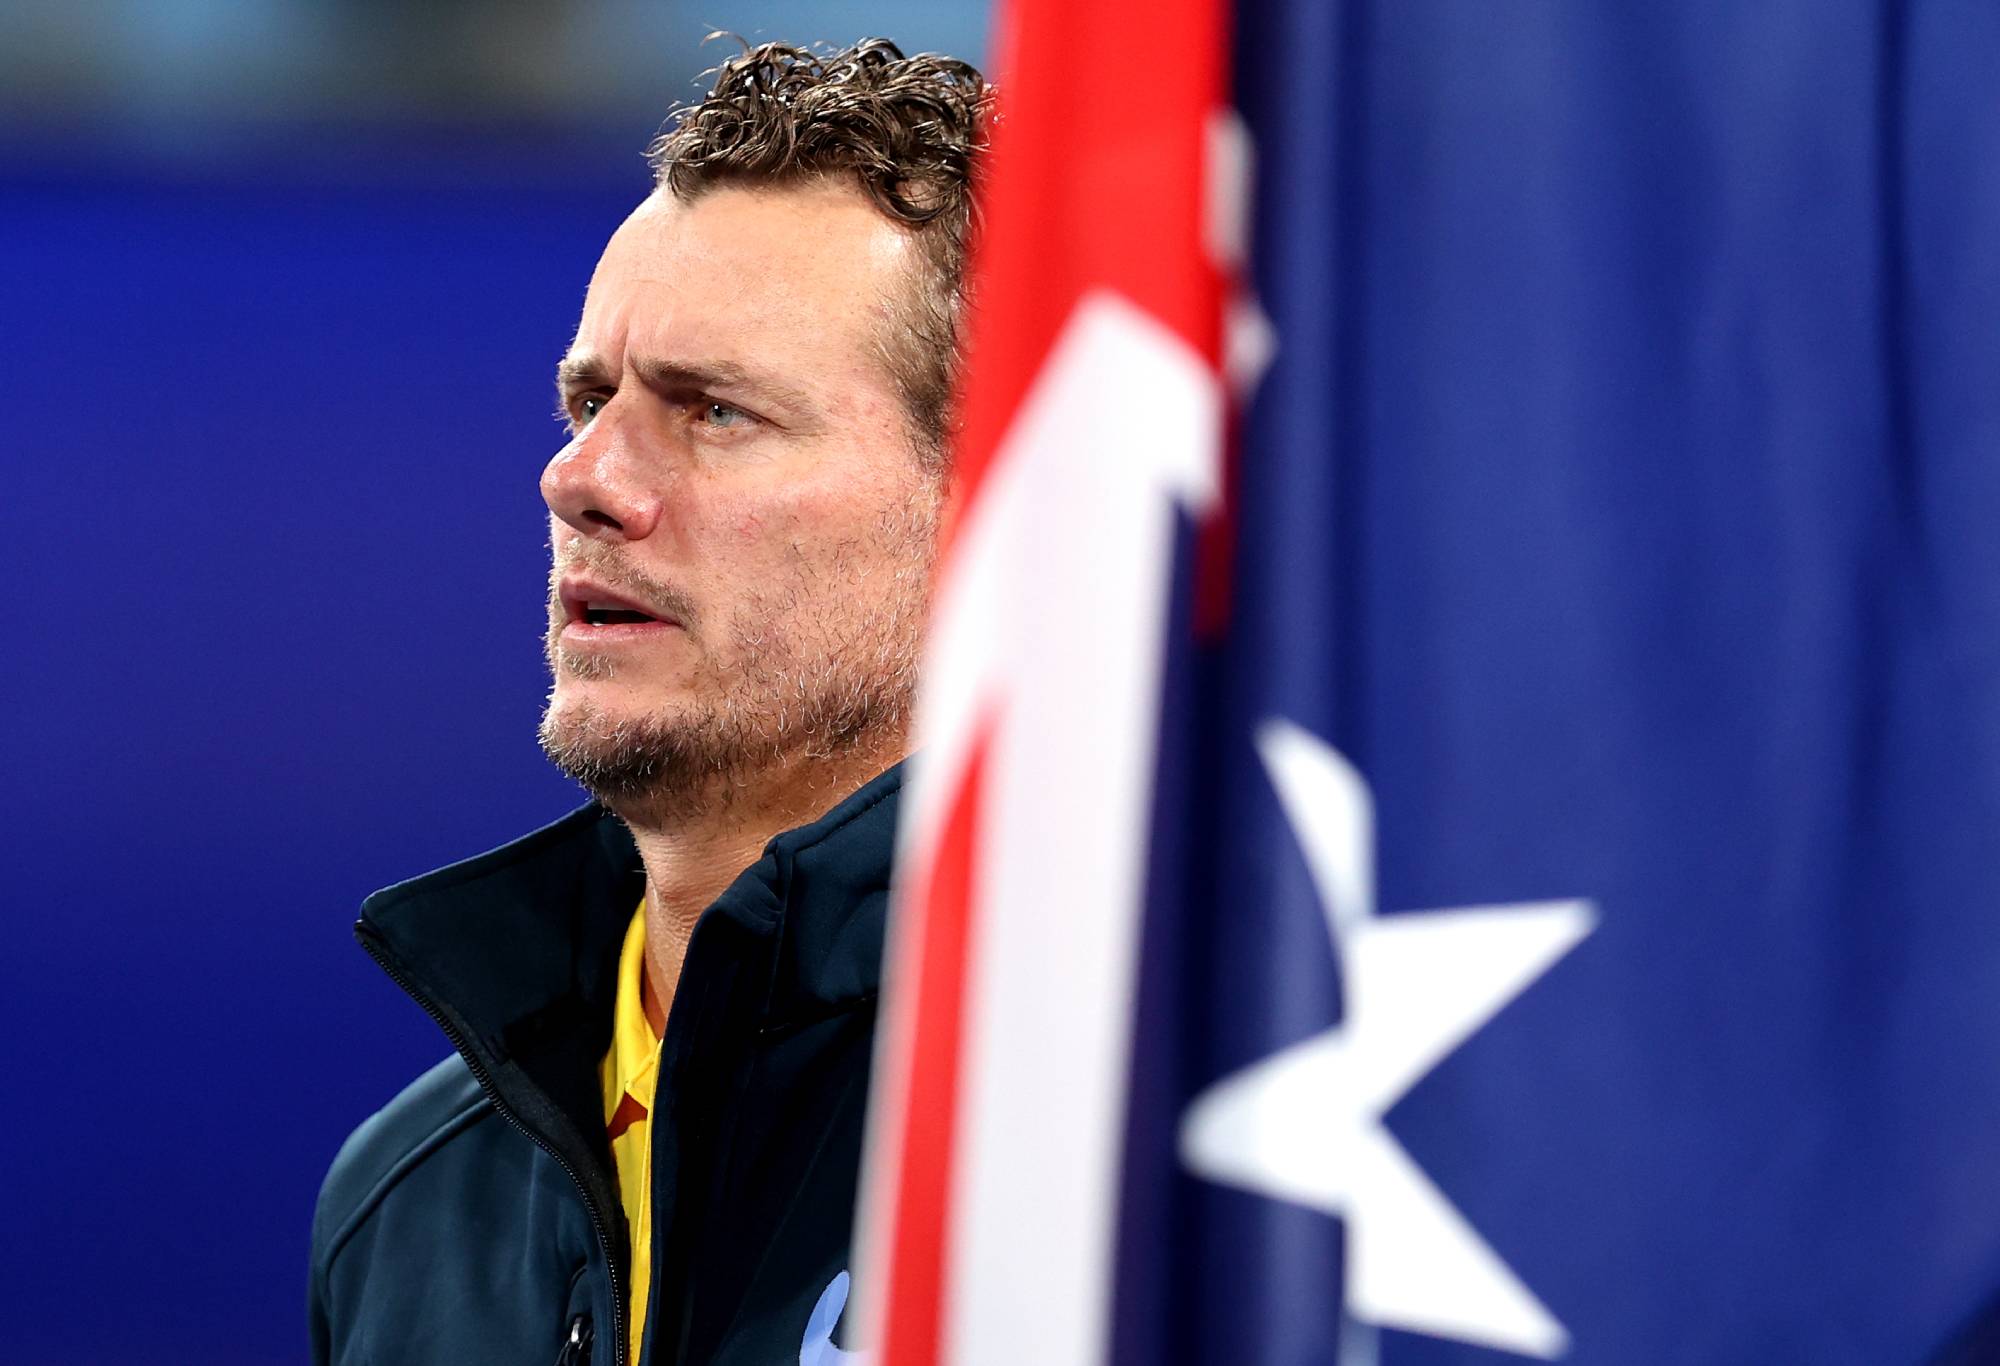 SYDNEY, AUSTRALIA - DECEMBER 29: Australian team captain, Lleyton Hewitt stands for the Australian national anthem prior to the group D match between Alex de Minaur of Australia and Cameron Norrie of Great Britain during day one of the 2023 United Cup at Ken Rosewall Arena on December 29, 2022 in Sydney, Australia. (Photo by Brendon Thorne/Getty Images)